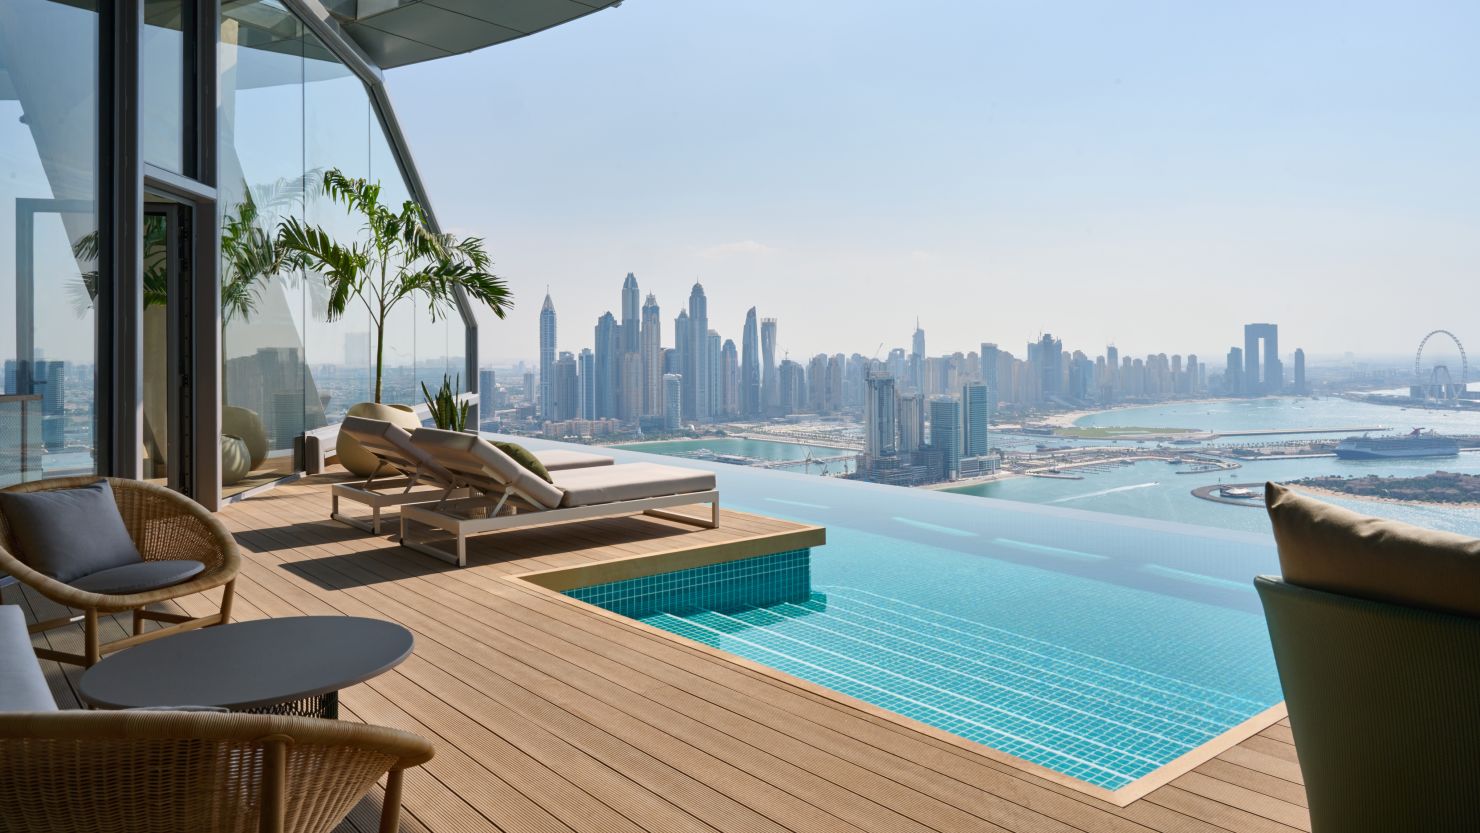 The Aura Skypool sits at a height of 200 meters. 